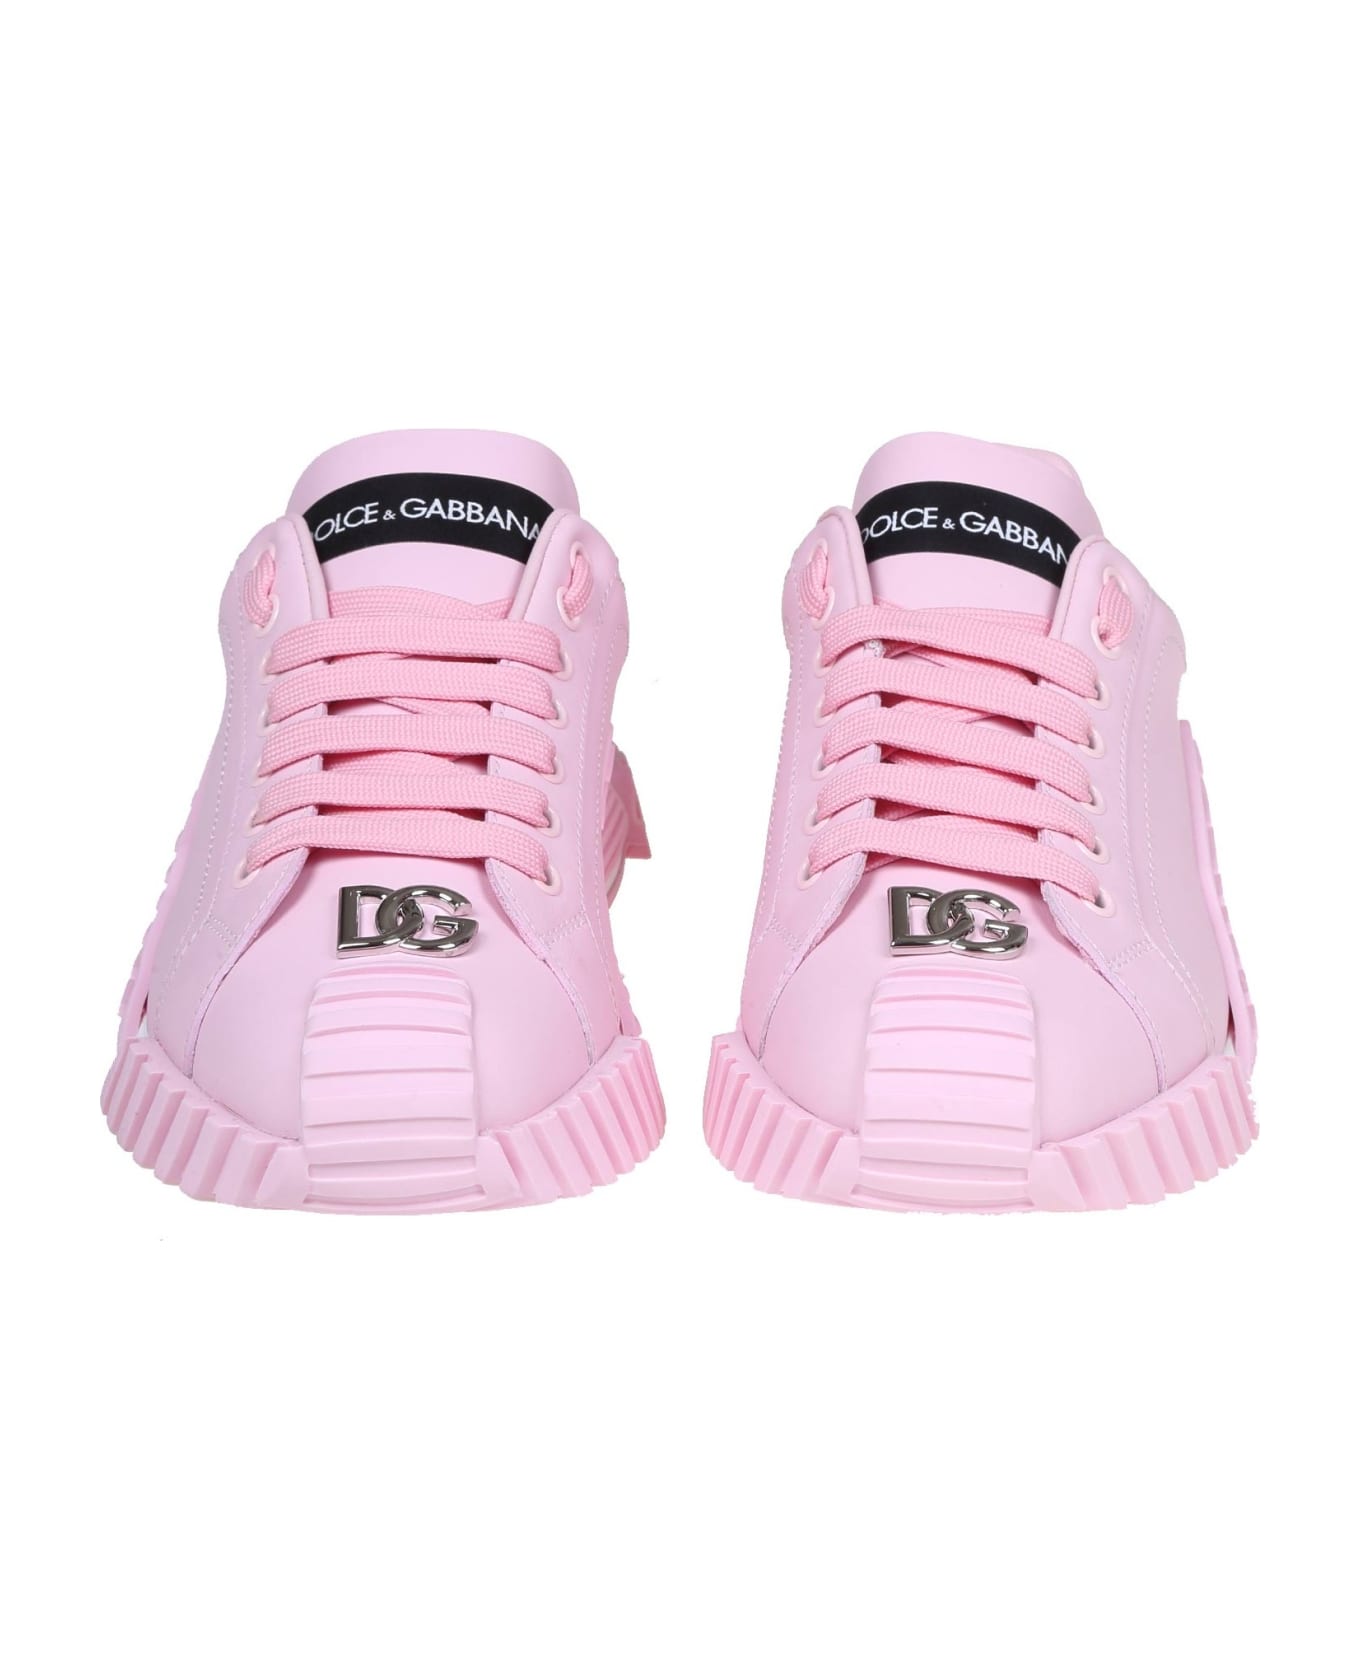 Dolce & Gabbana Sneakers - PINK